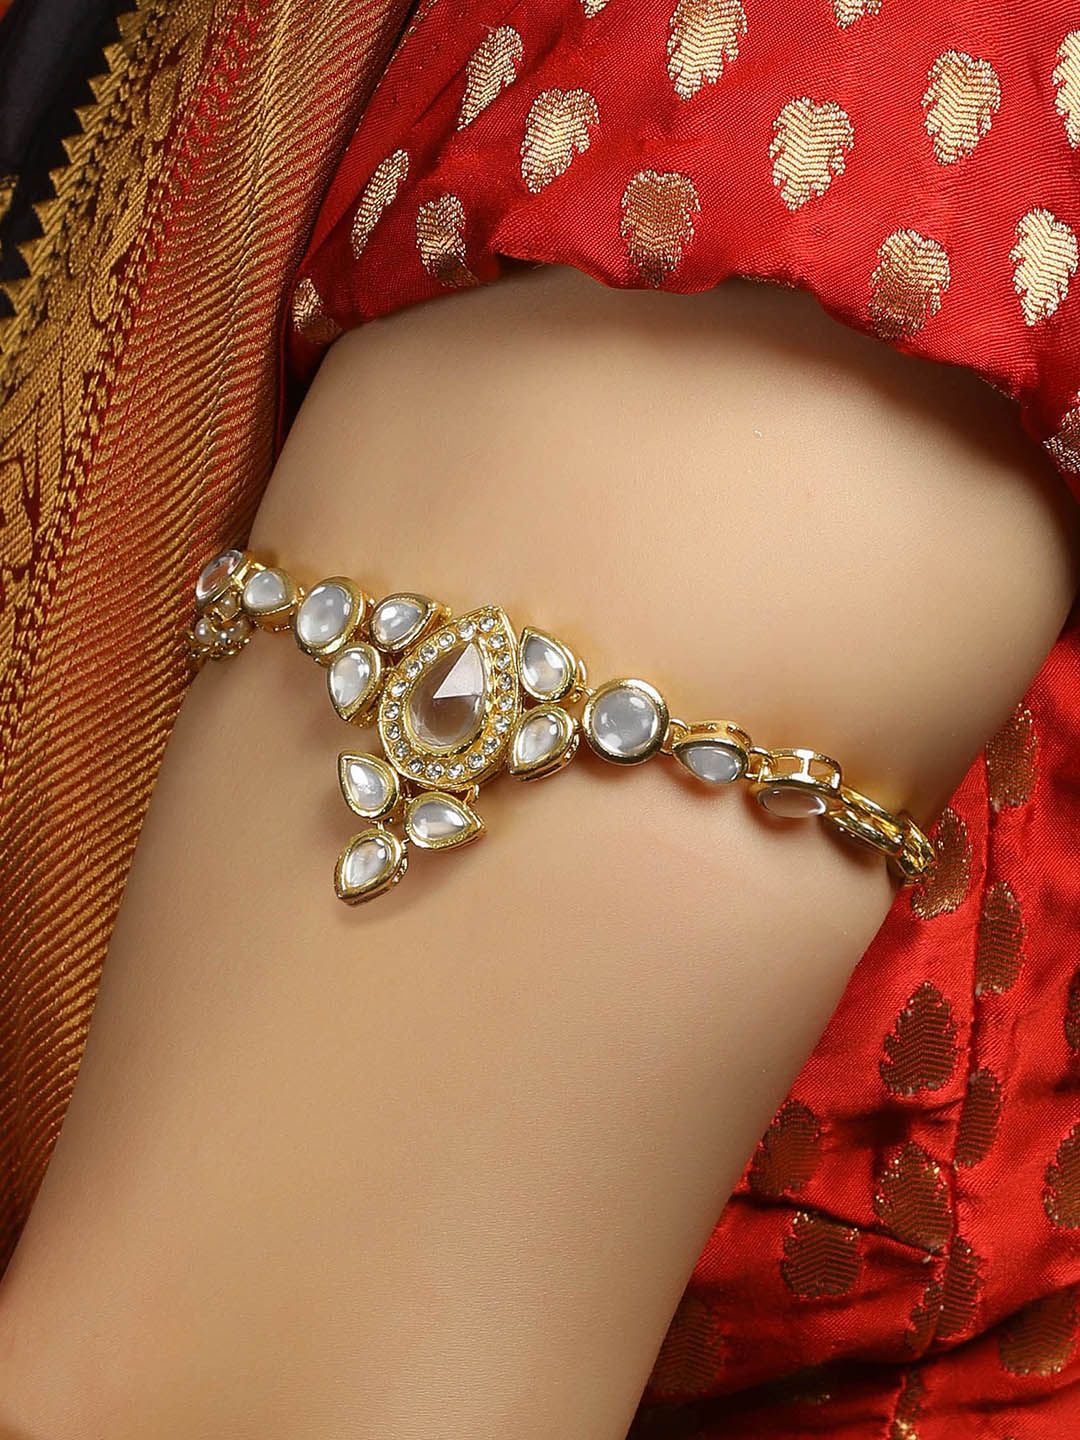 KARATCART Women Gold-Toned & White Kundan Handcrafted Gold-Plated Armlet Bracelet Price in India